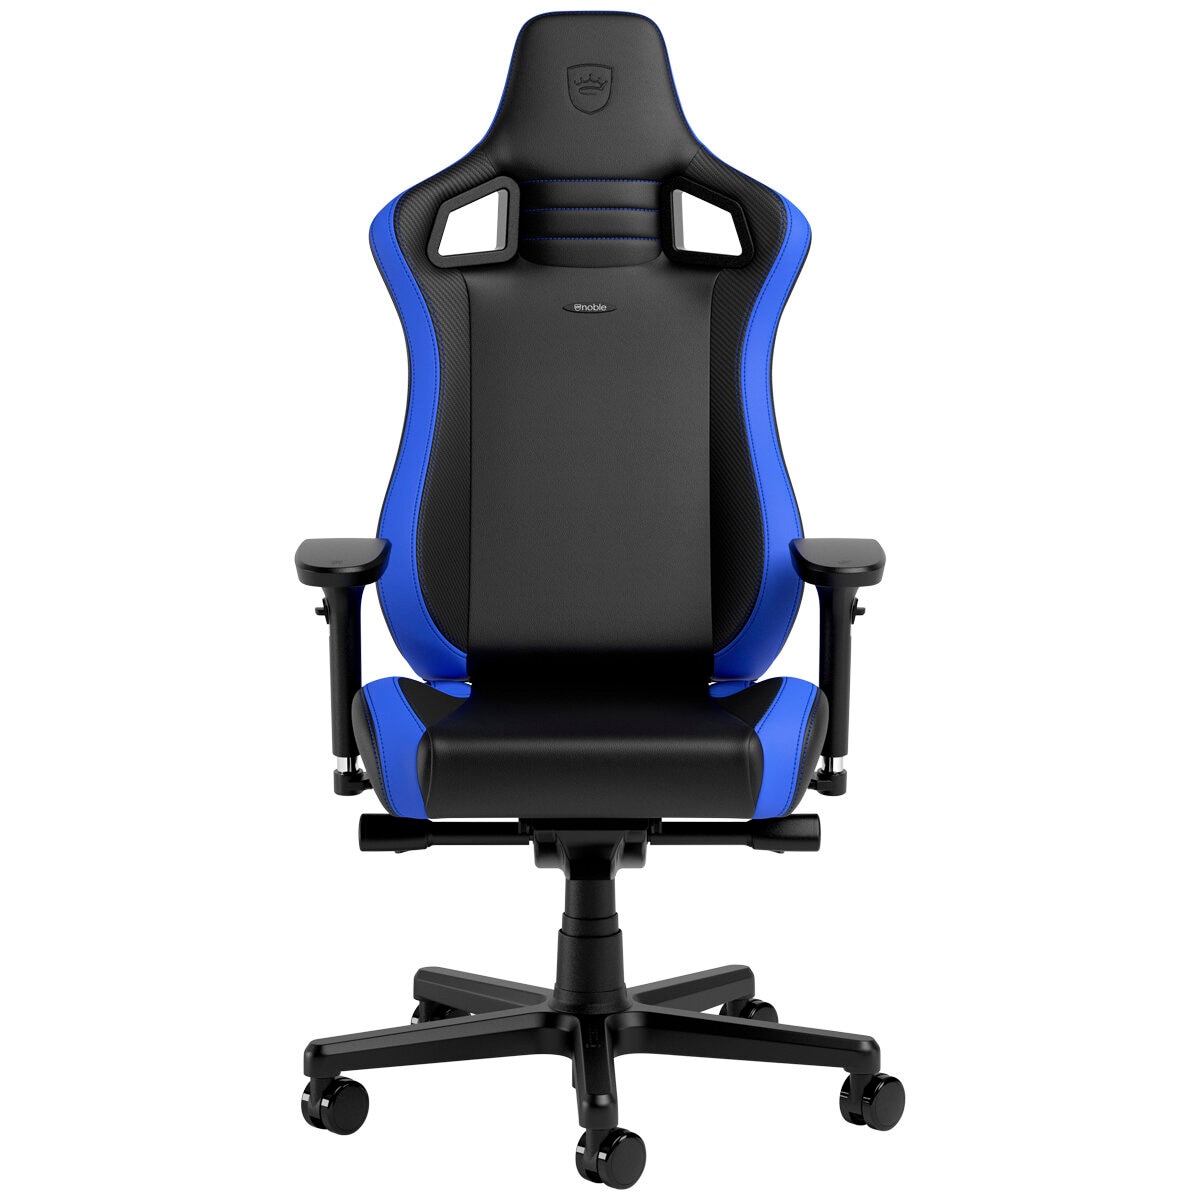 Noblechairs EPIC Compact Gaming Chair